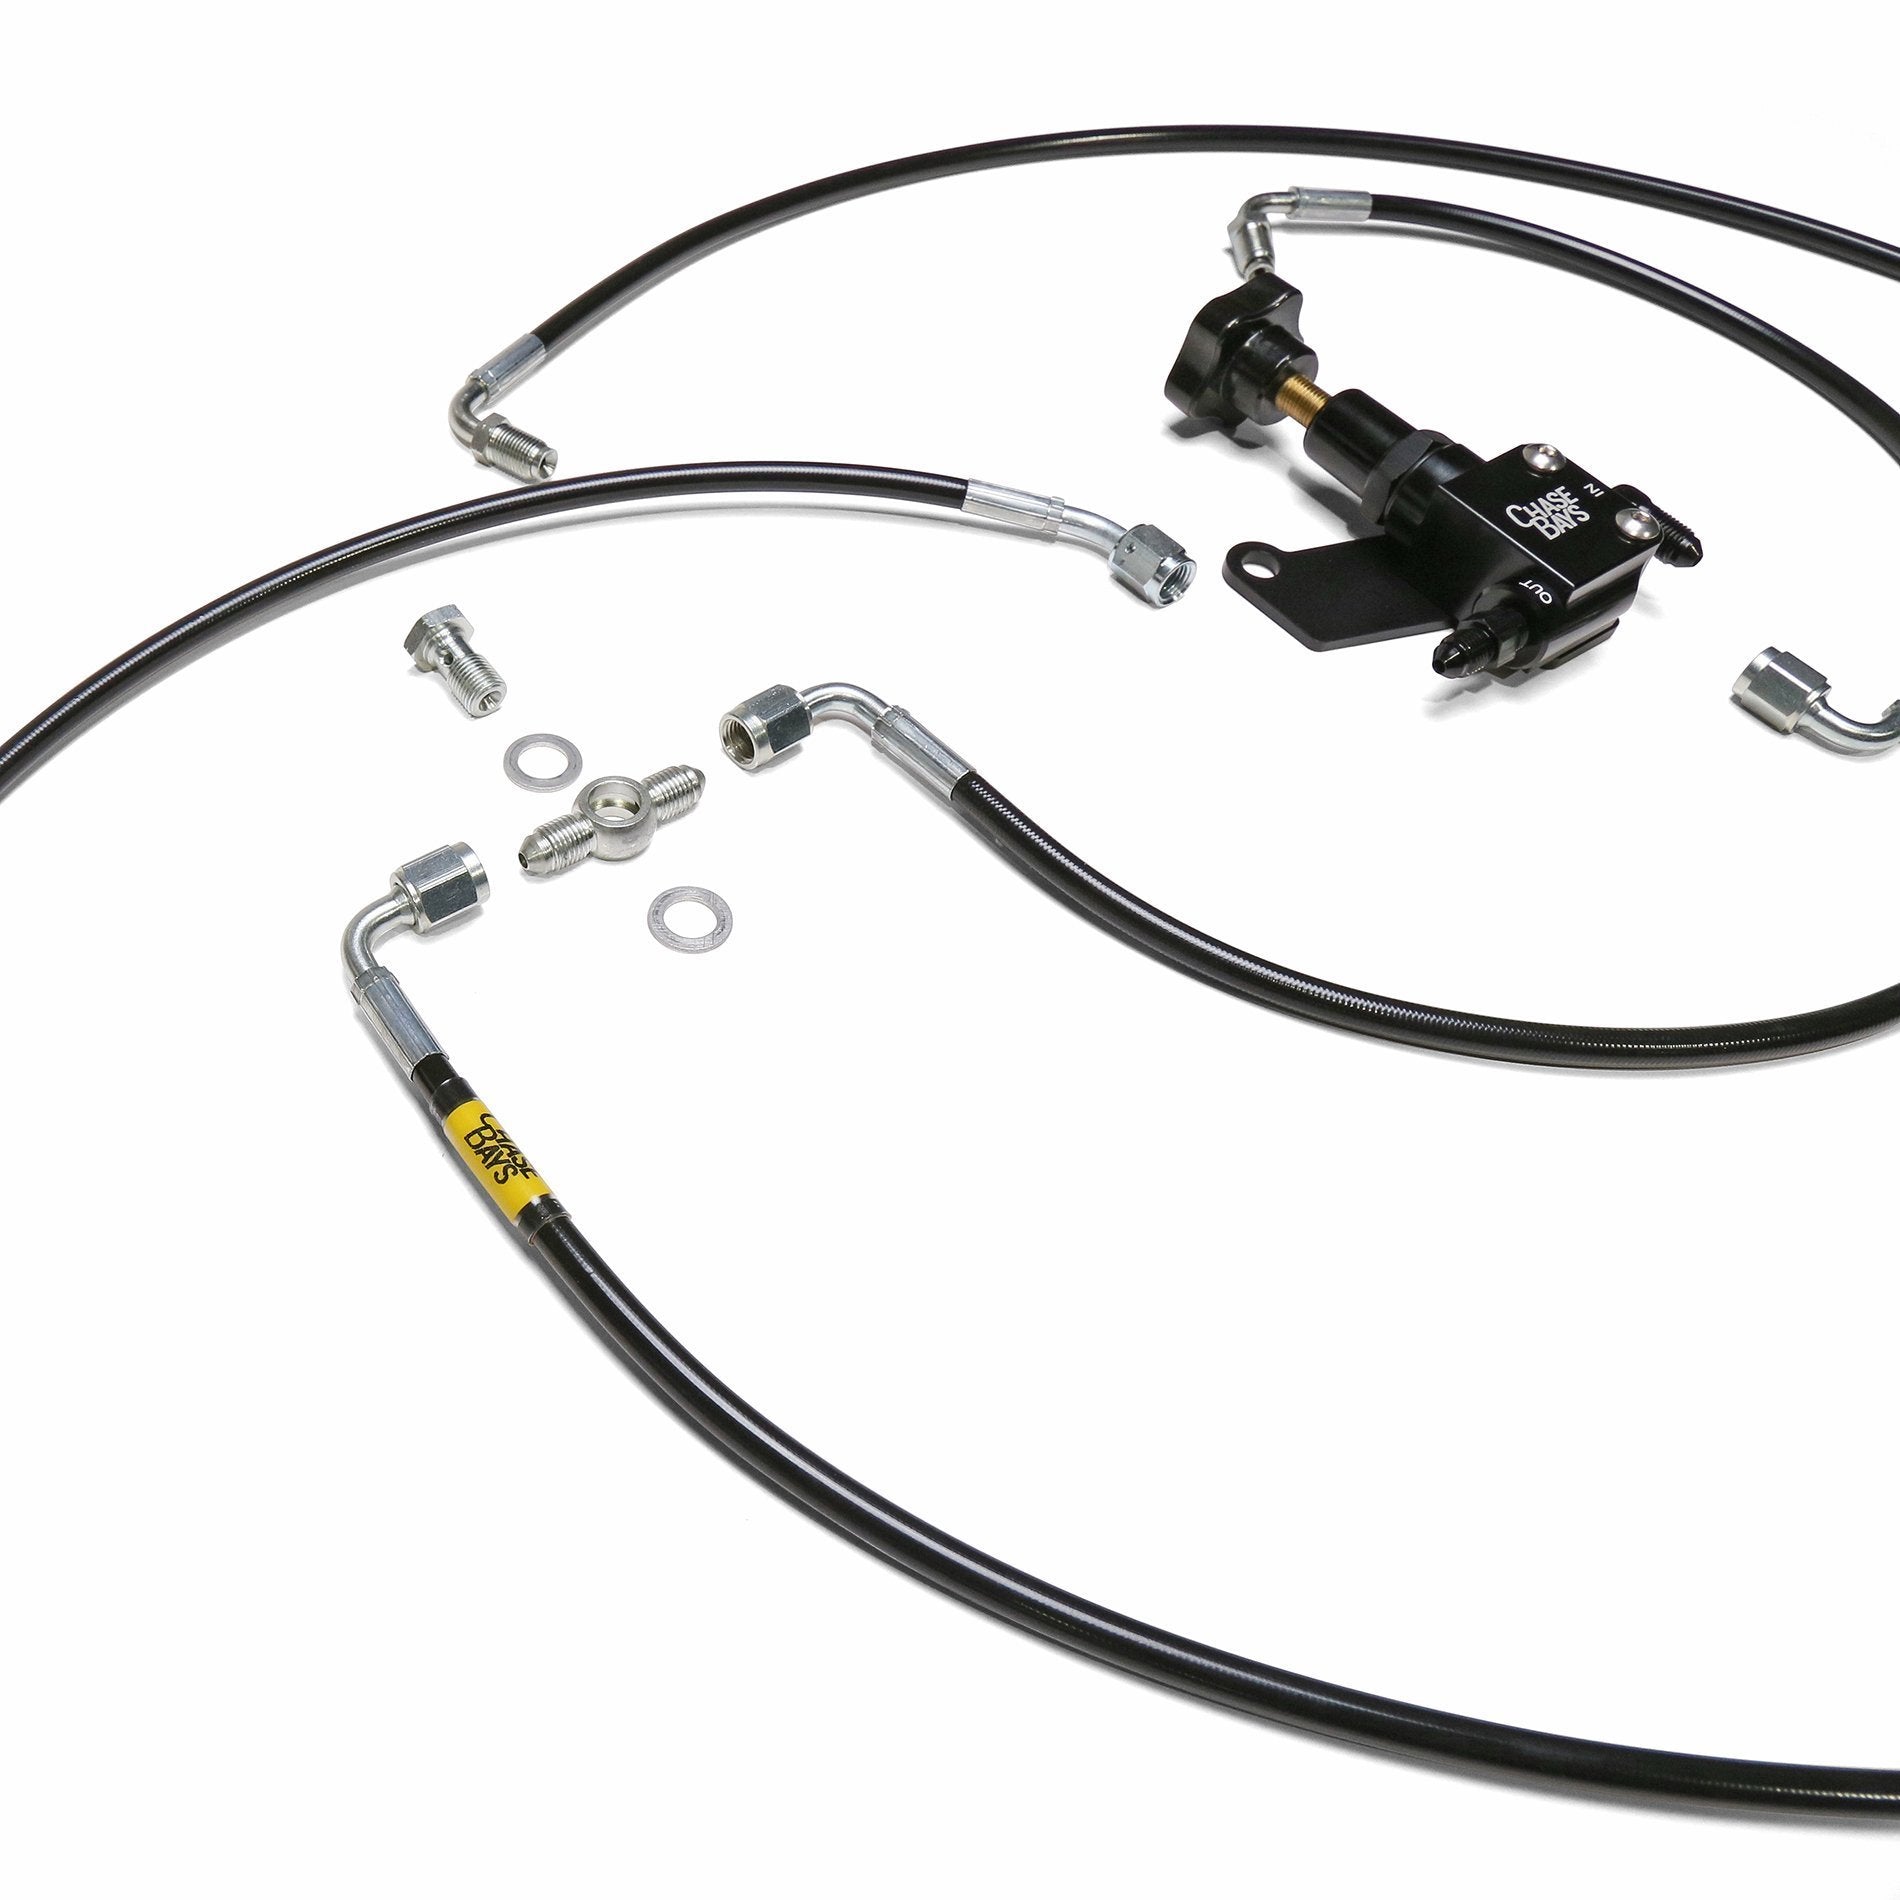 CHASE BAYS Toyota AE86 brake line relocation kit for OEM brake cylinders - PARTS33 GmbH